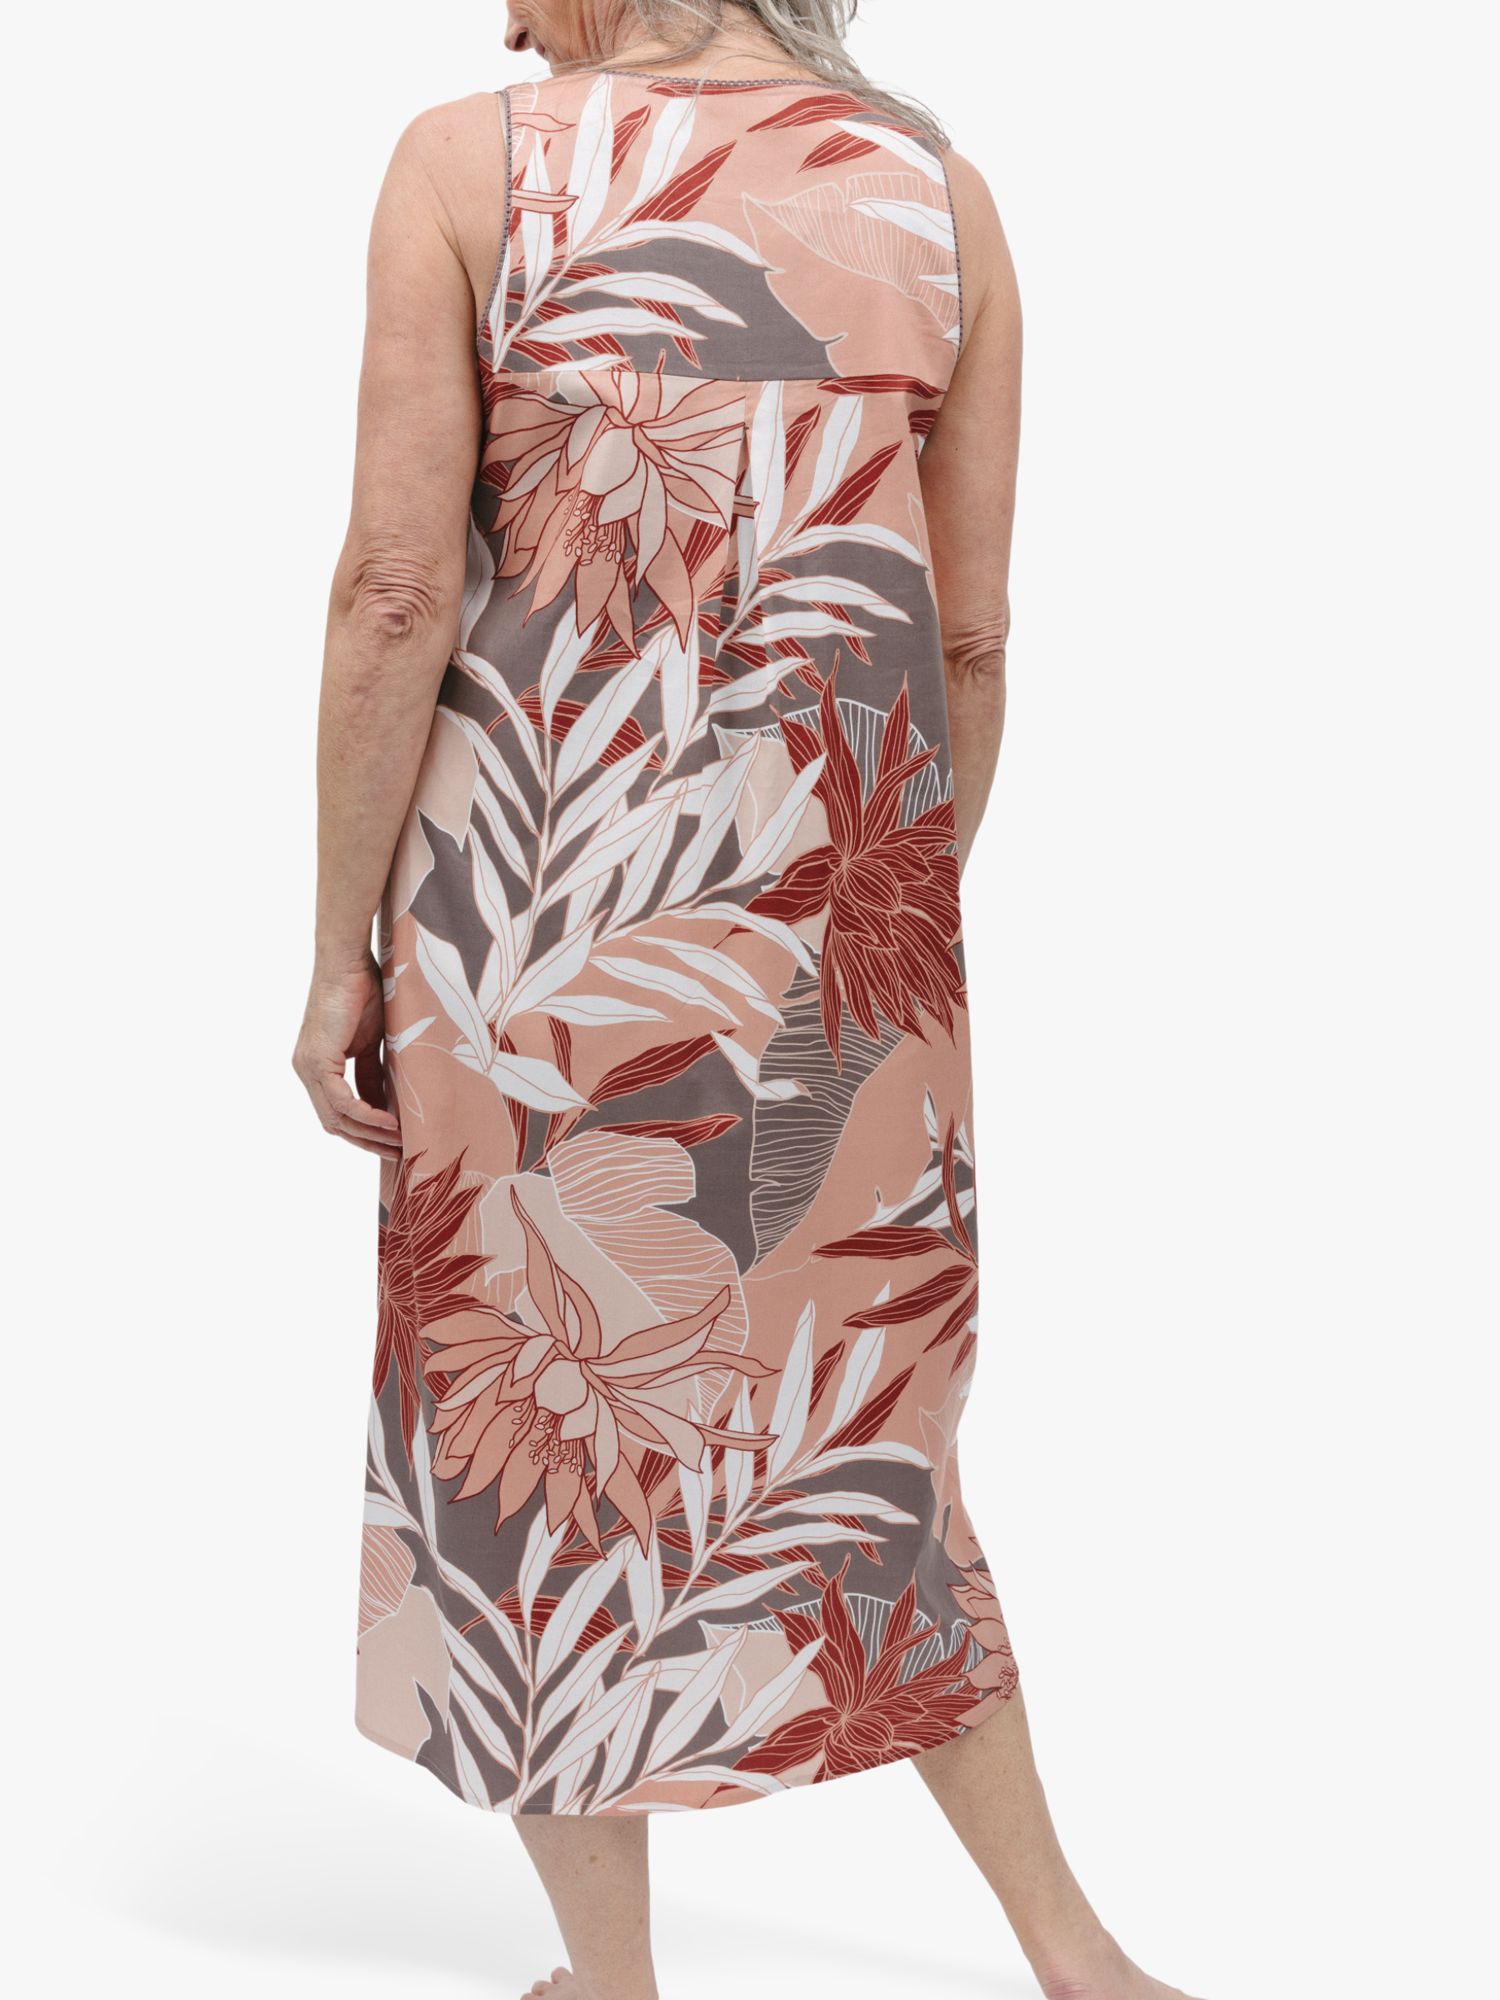 Buy Cyberjammies Evette Floral Sleeveless Nightdress, Taupe Online at johnlewis.com